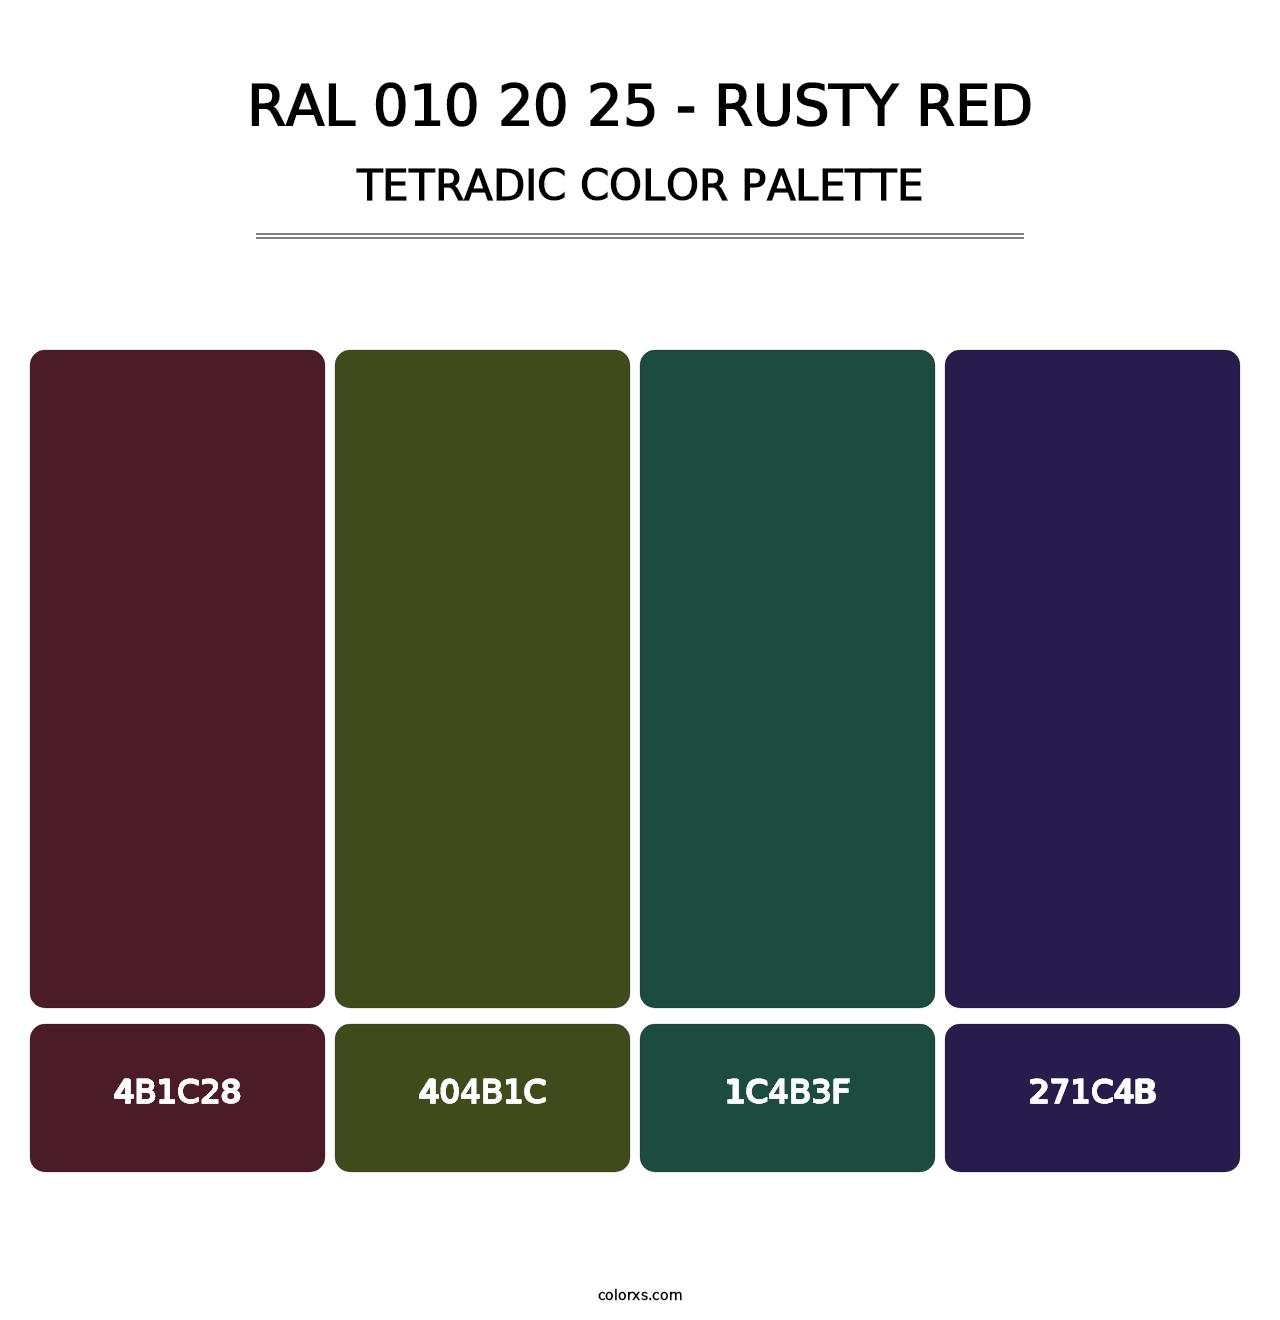 RAL 010 20 25 - Rusty Red - Tetradic Color Palette